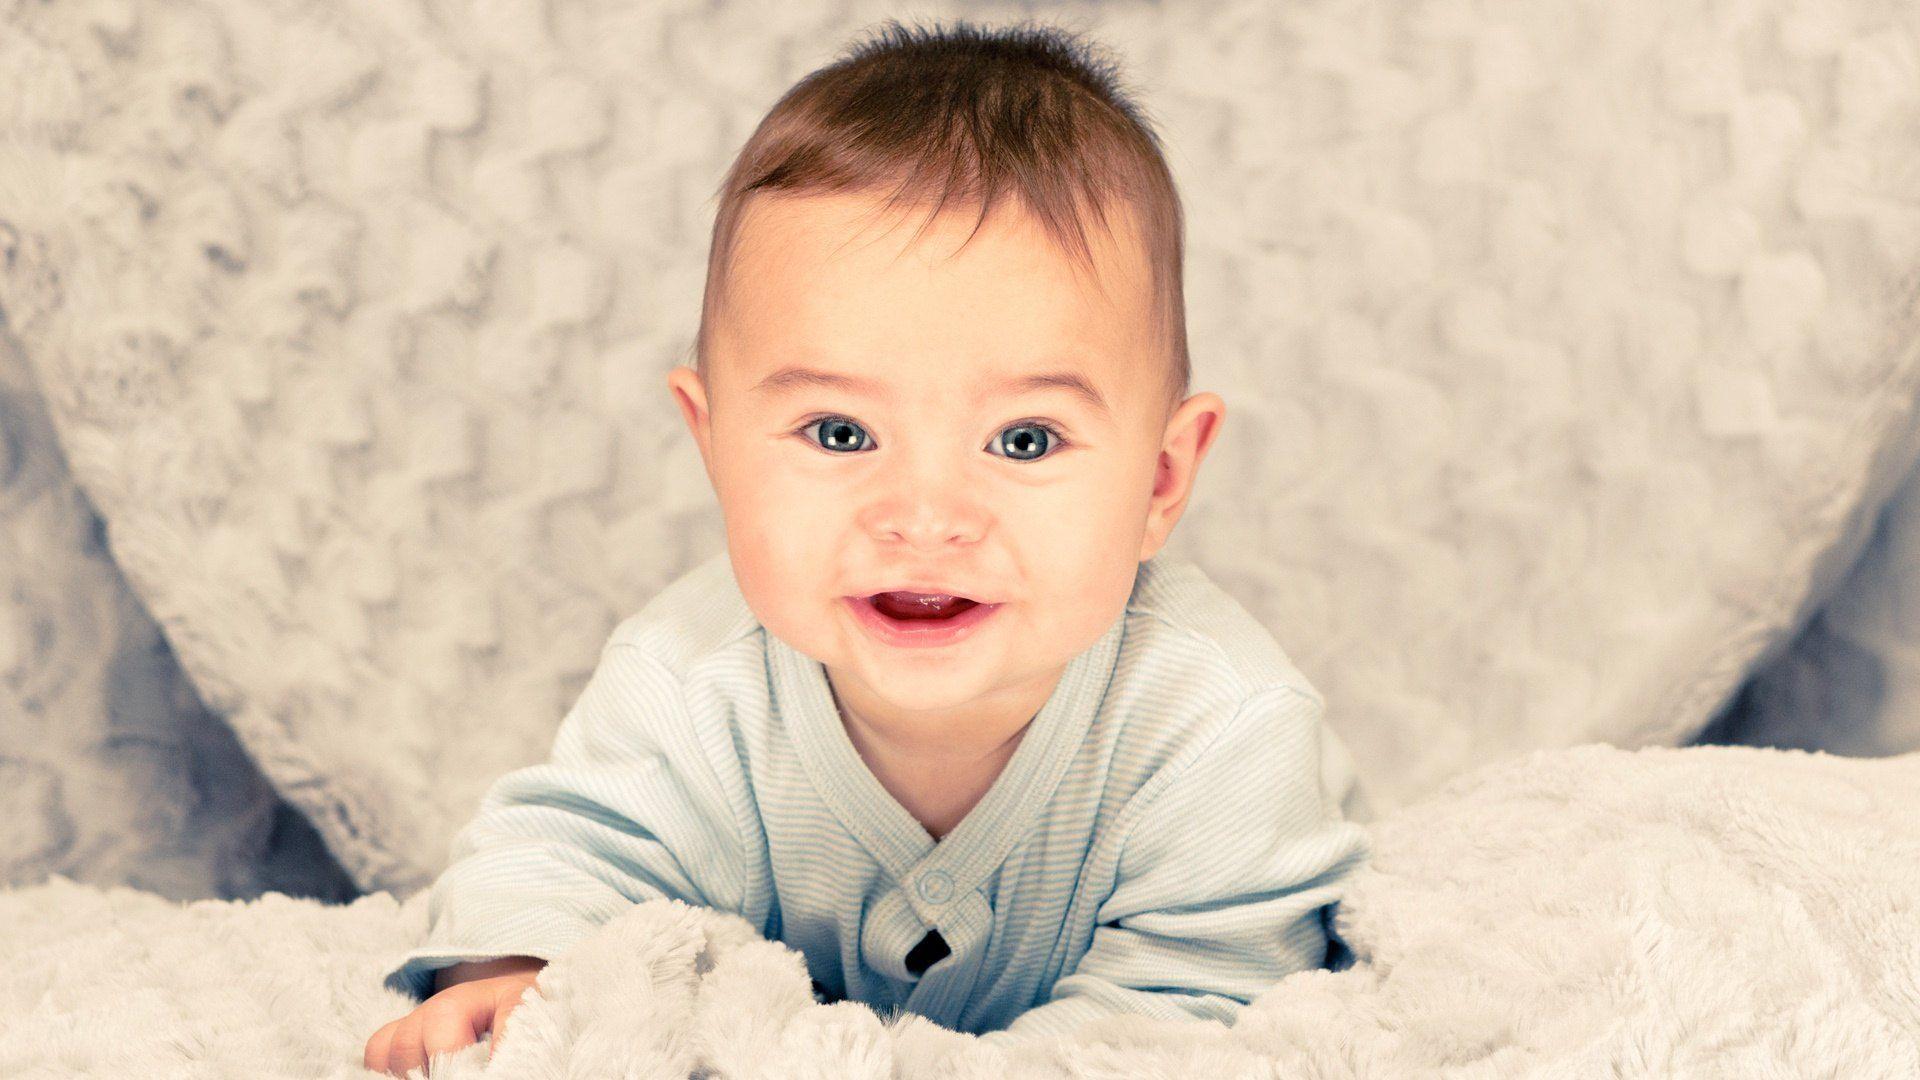 Adorable Cute Baby Boy Wallpapers Download for Phone